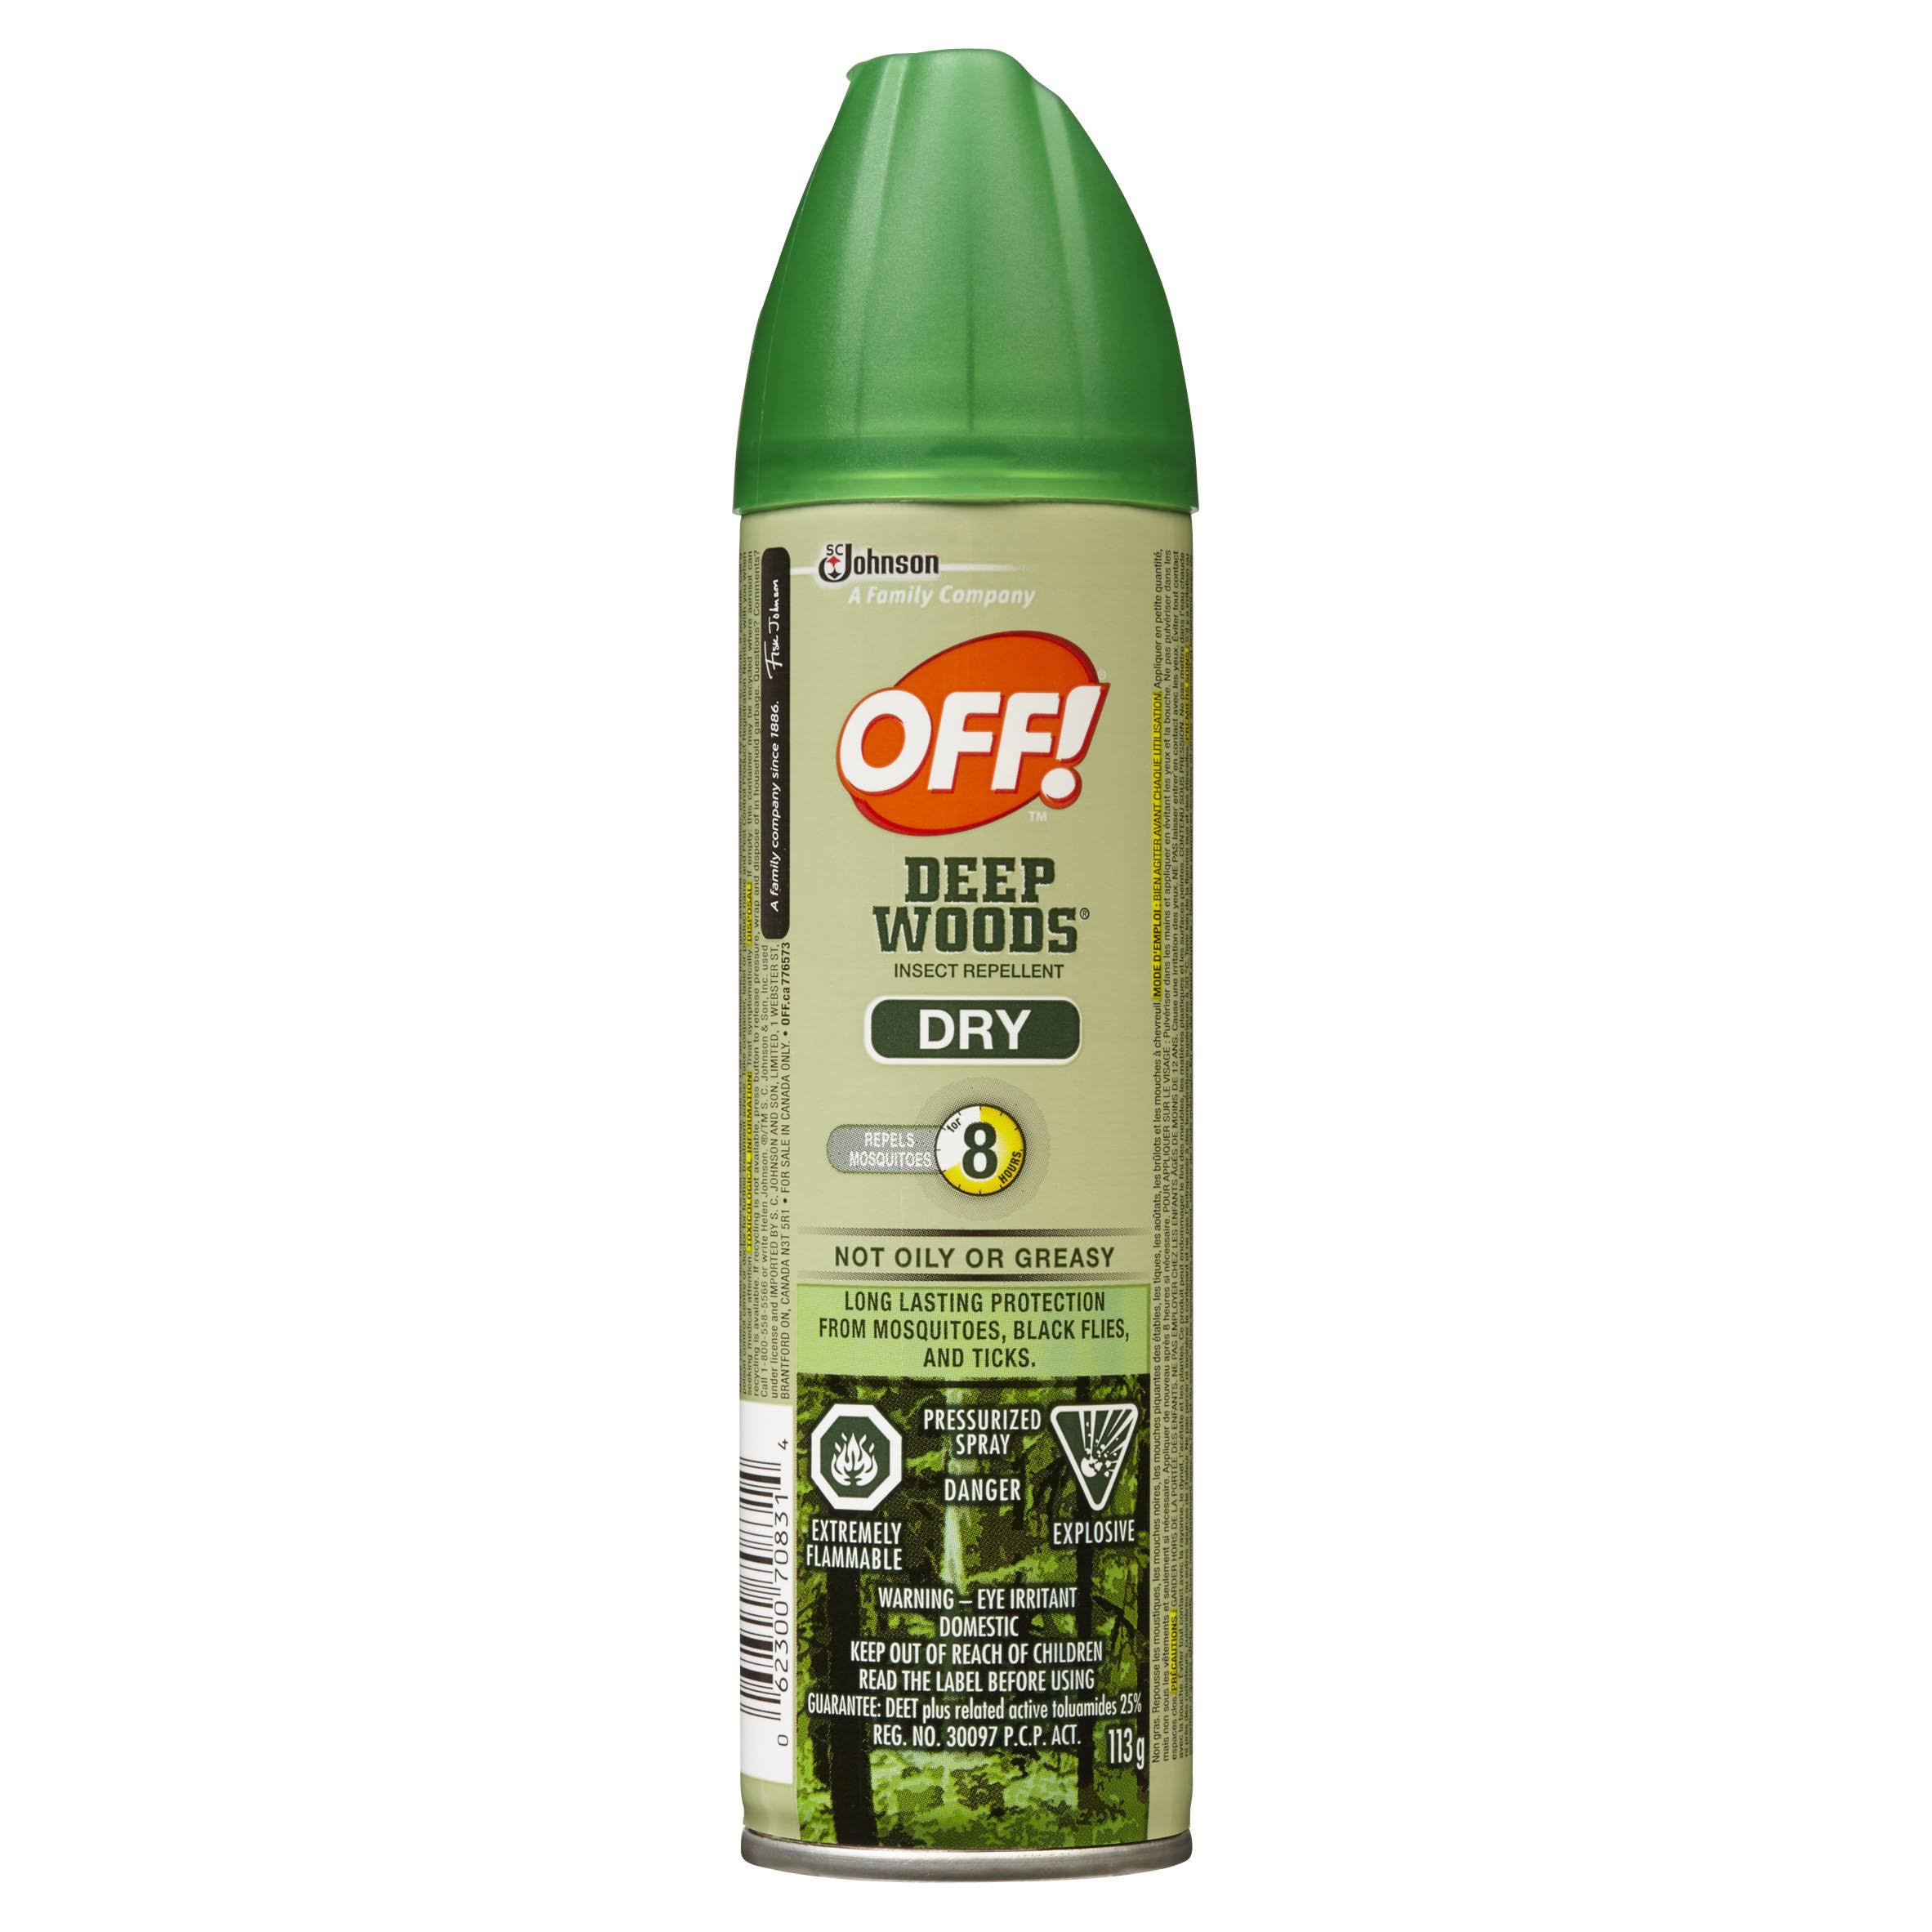 OFF! Deep Woods Dry Insect Repellent - 113 g